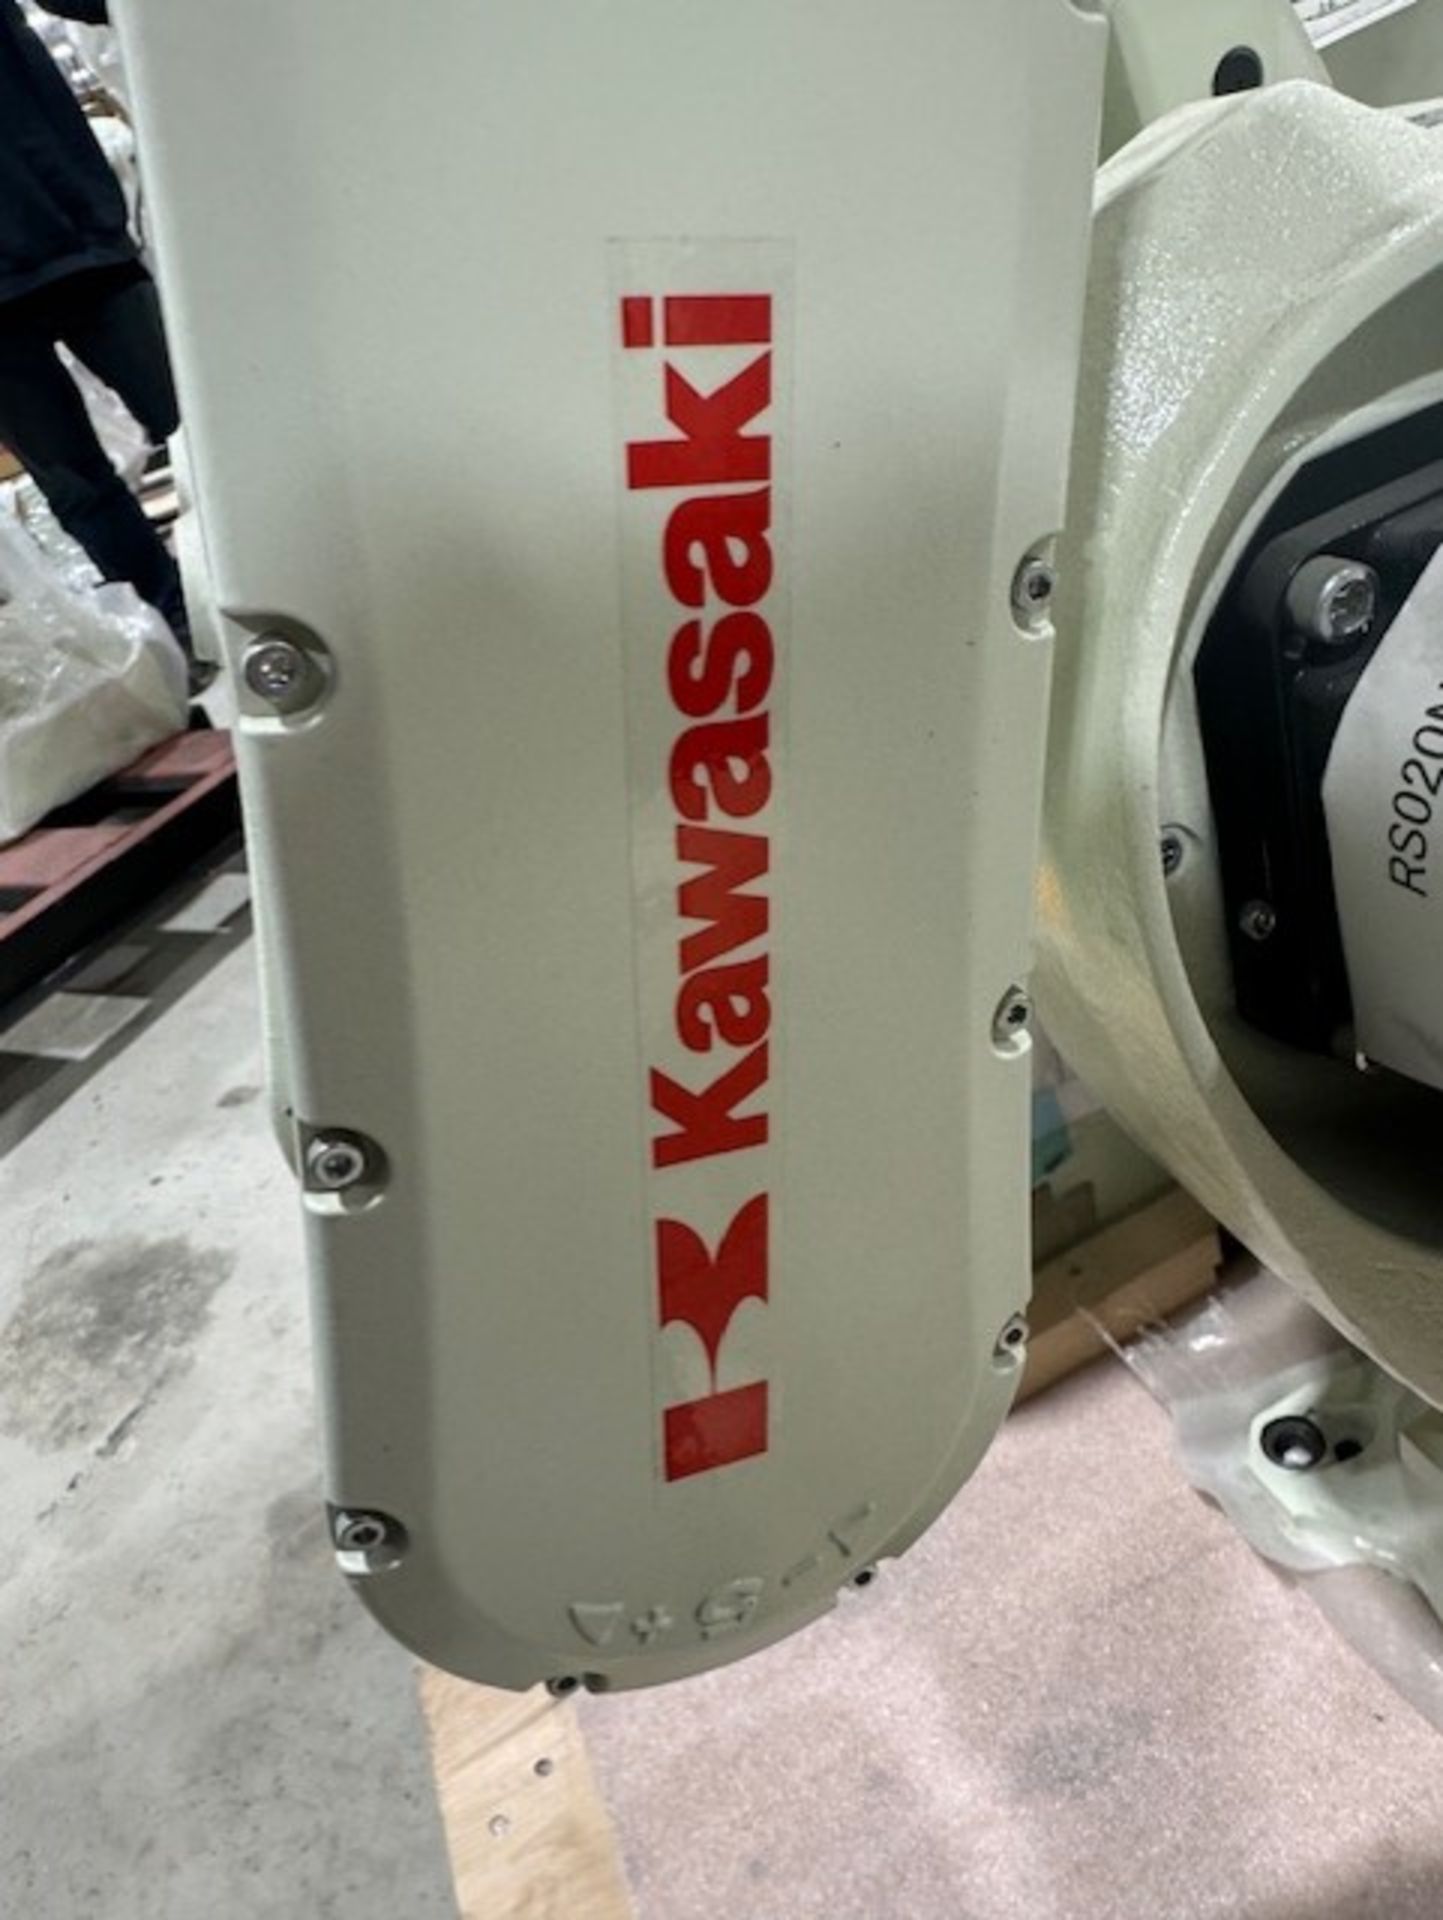 NEW KAWASAKI ROBOT MODEL RS020N, SN 4579, 20KG X 1725MM REACH WITH EO1 CONTROLS, CABLES & TEACH - Image 5 of 7